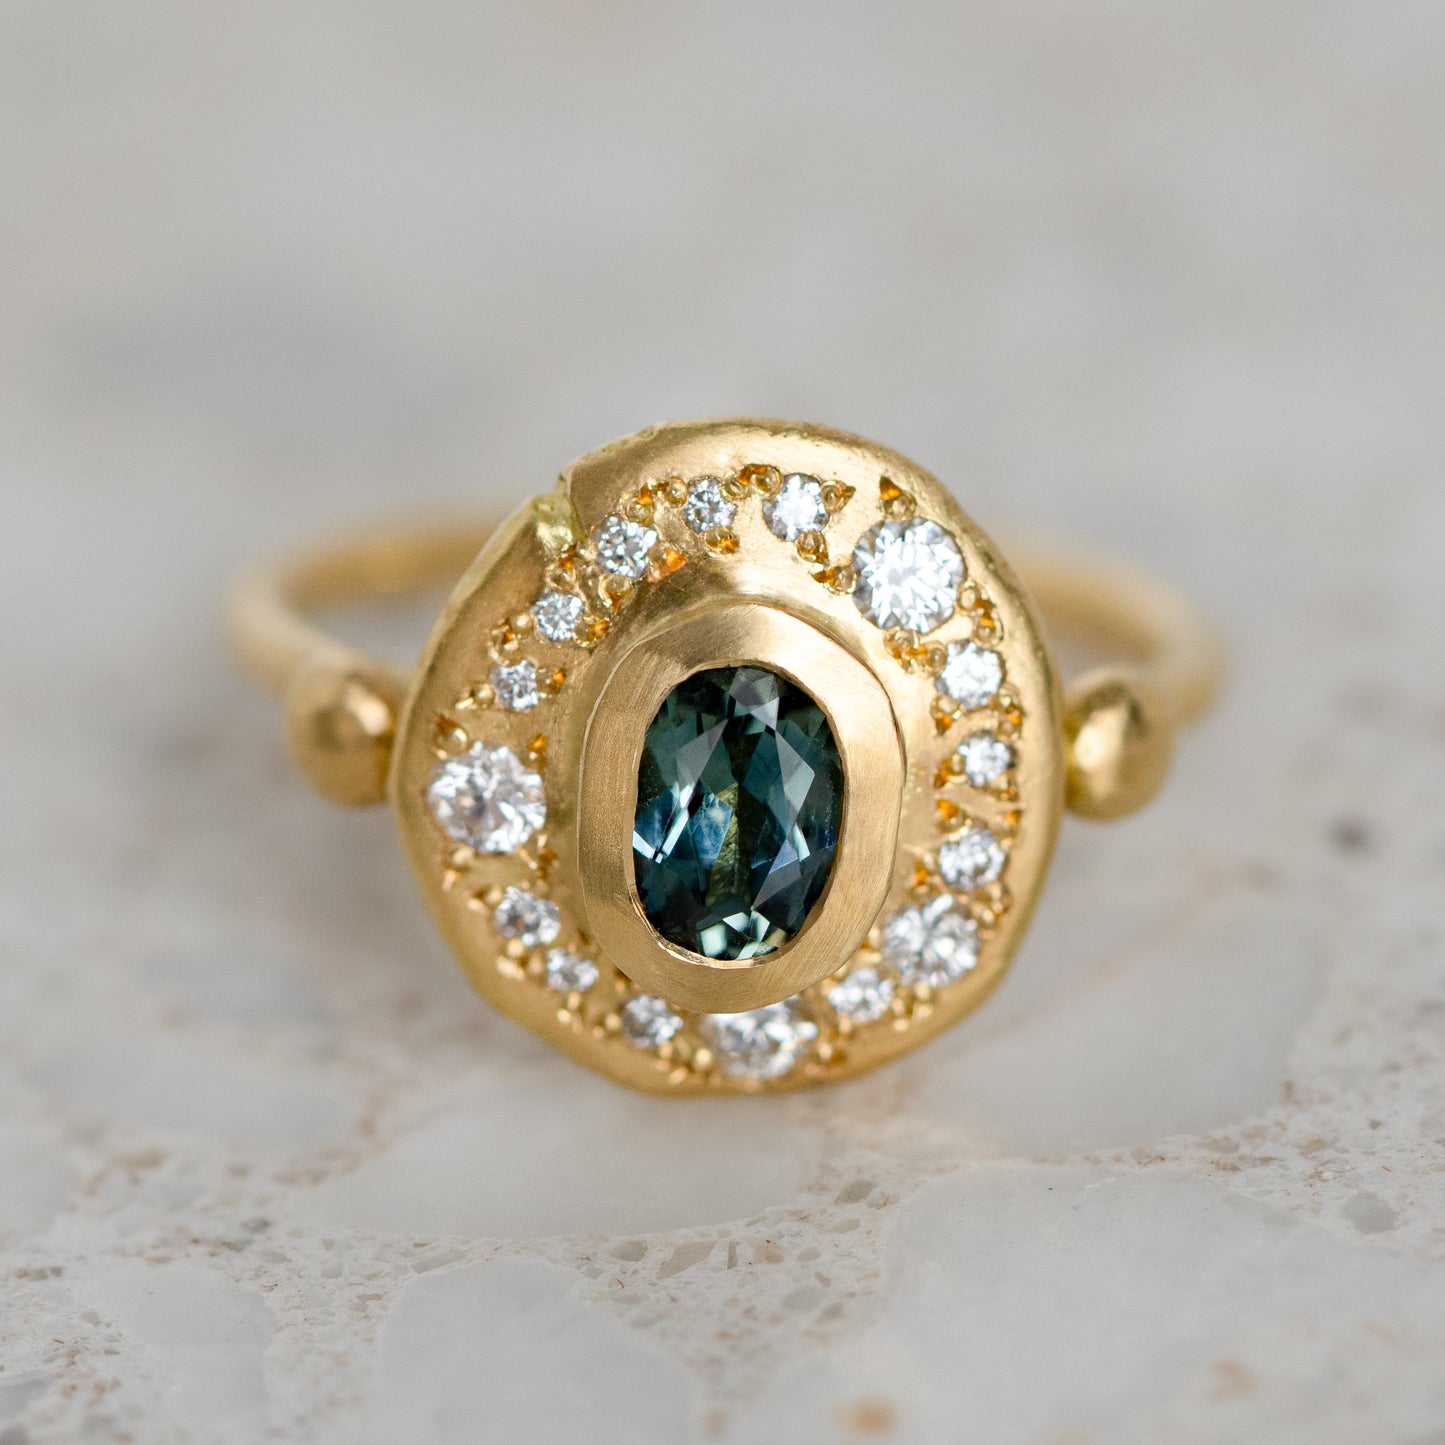 One-off Parti Sapphire Trove Ring in 18ct Yellow Gold, size M and a half (In Stock)